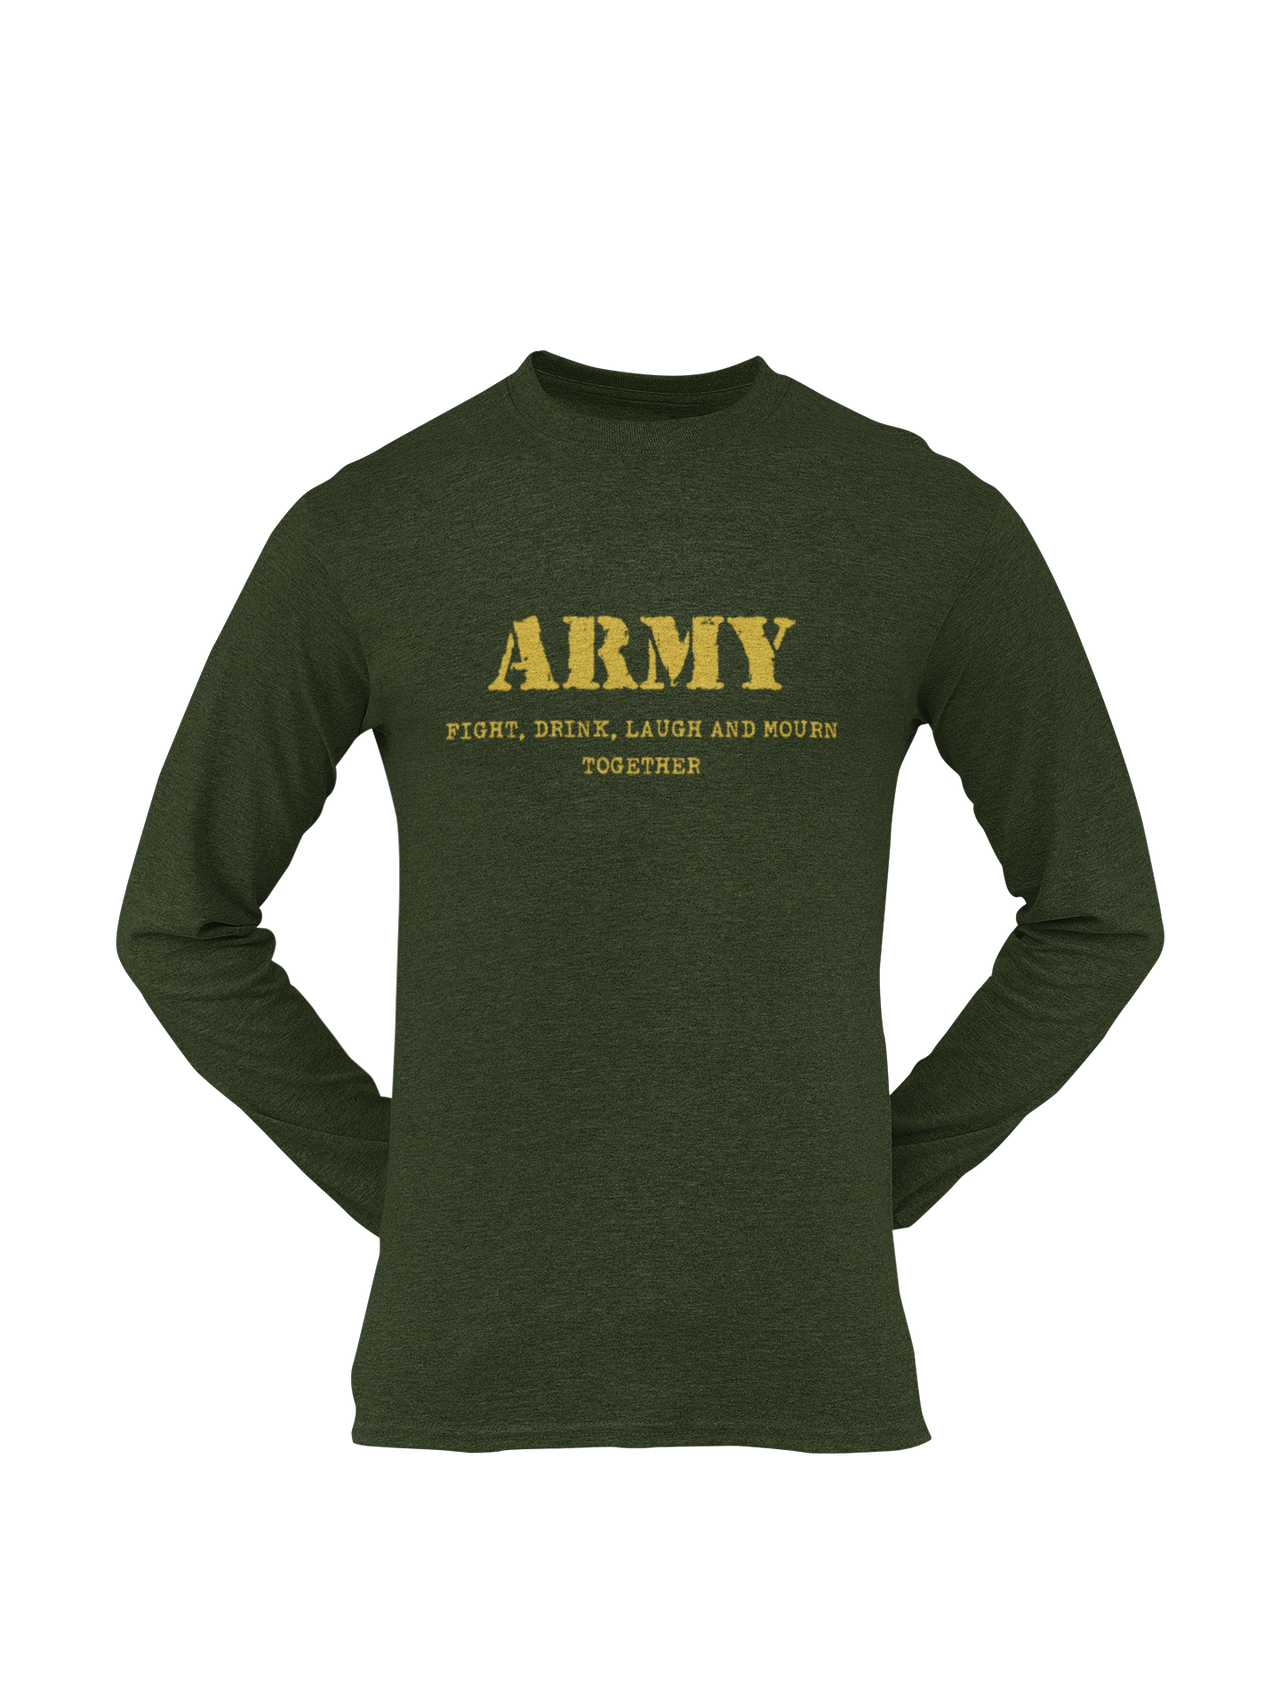 Army T-shirt - Fight, Drink, Laugh and Mourn Together (Men)